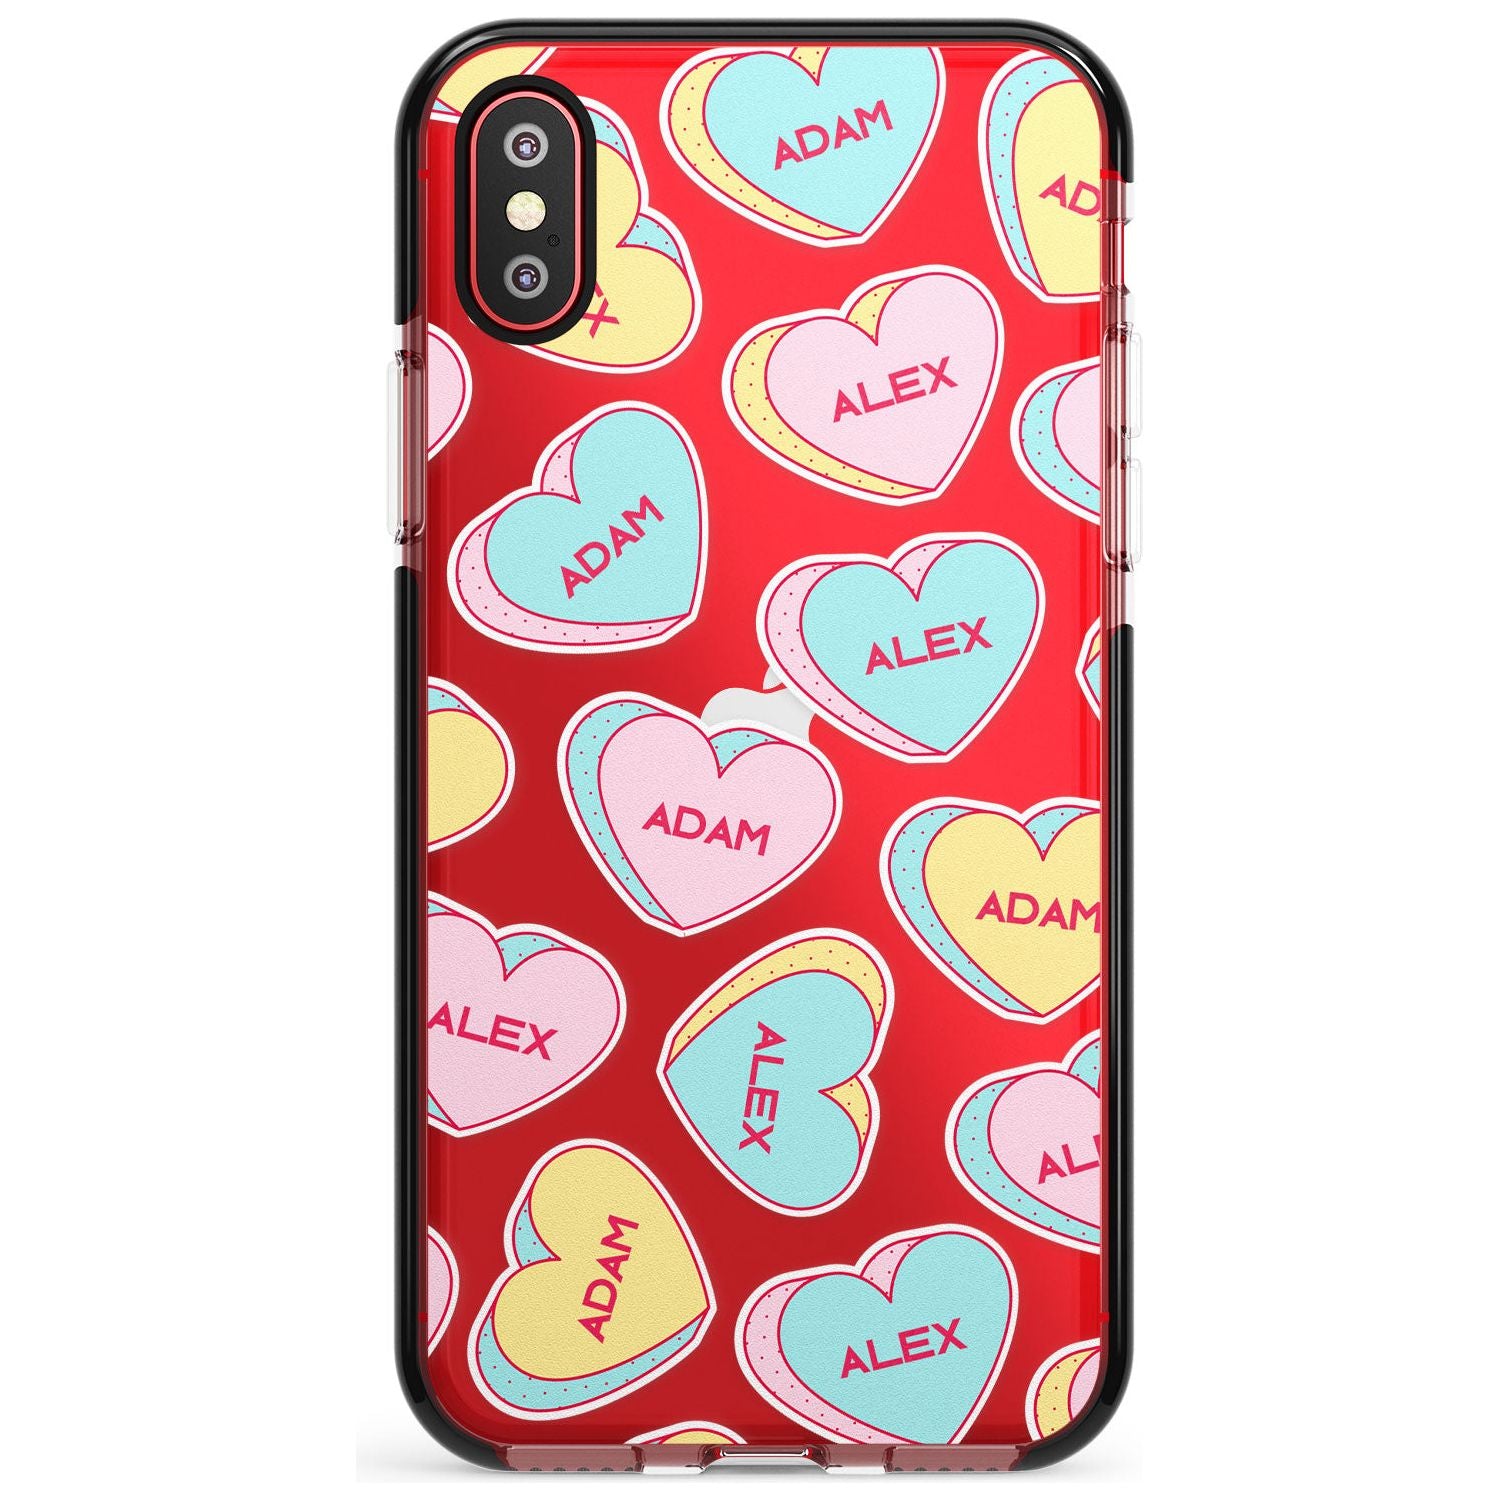 Custom Text Love Hearts Pink Fade Impact Phone Case for iPhone X XS Max XR